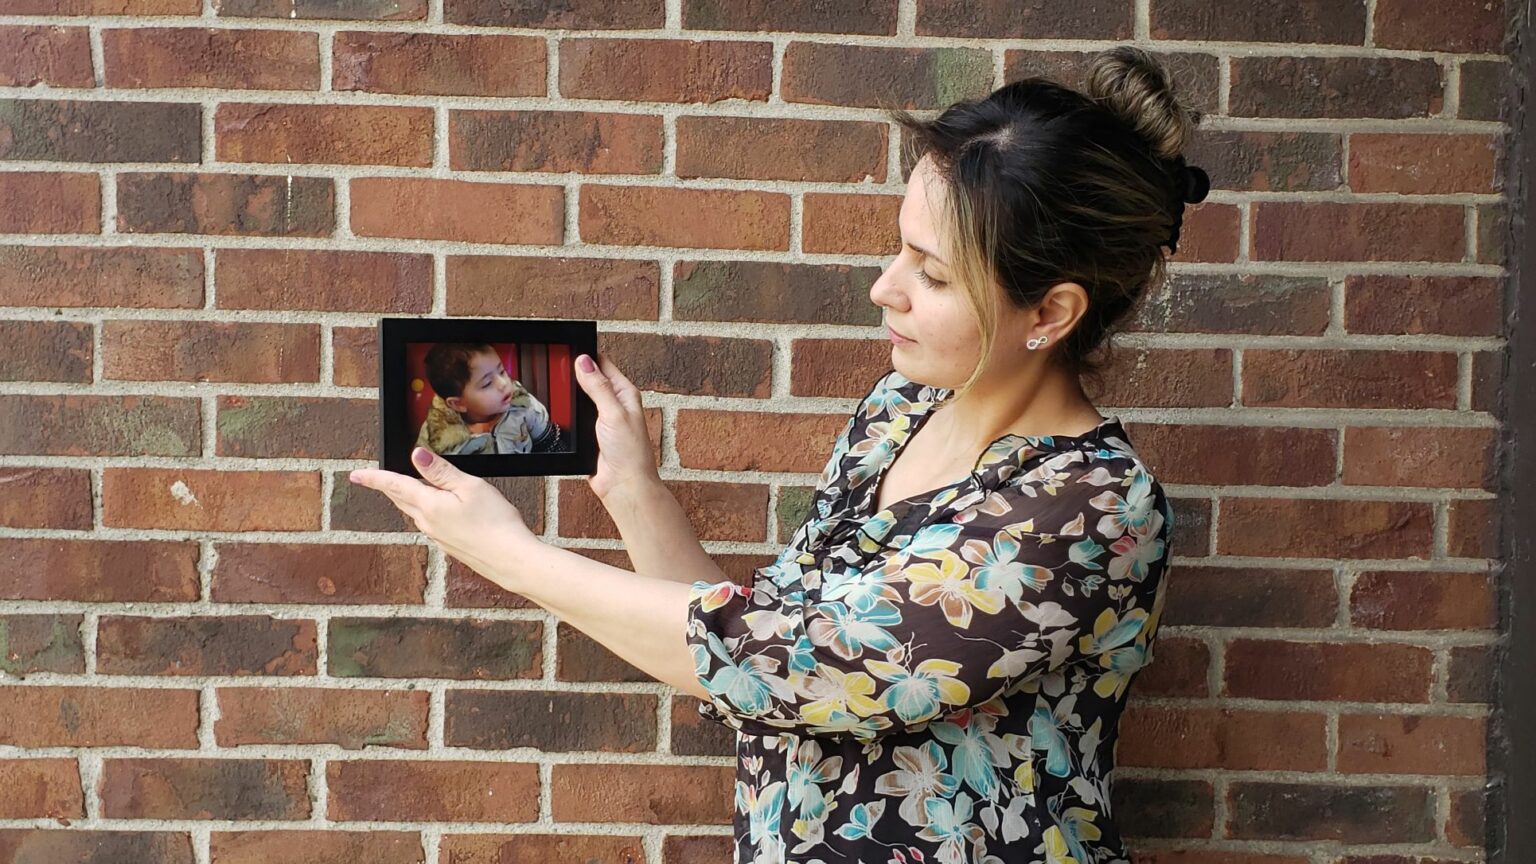 A woman standing in front of a red brick wall holding a framed photo of a young boy